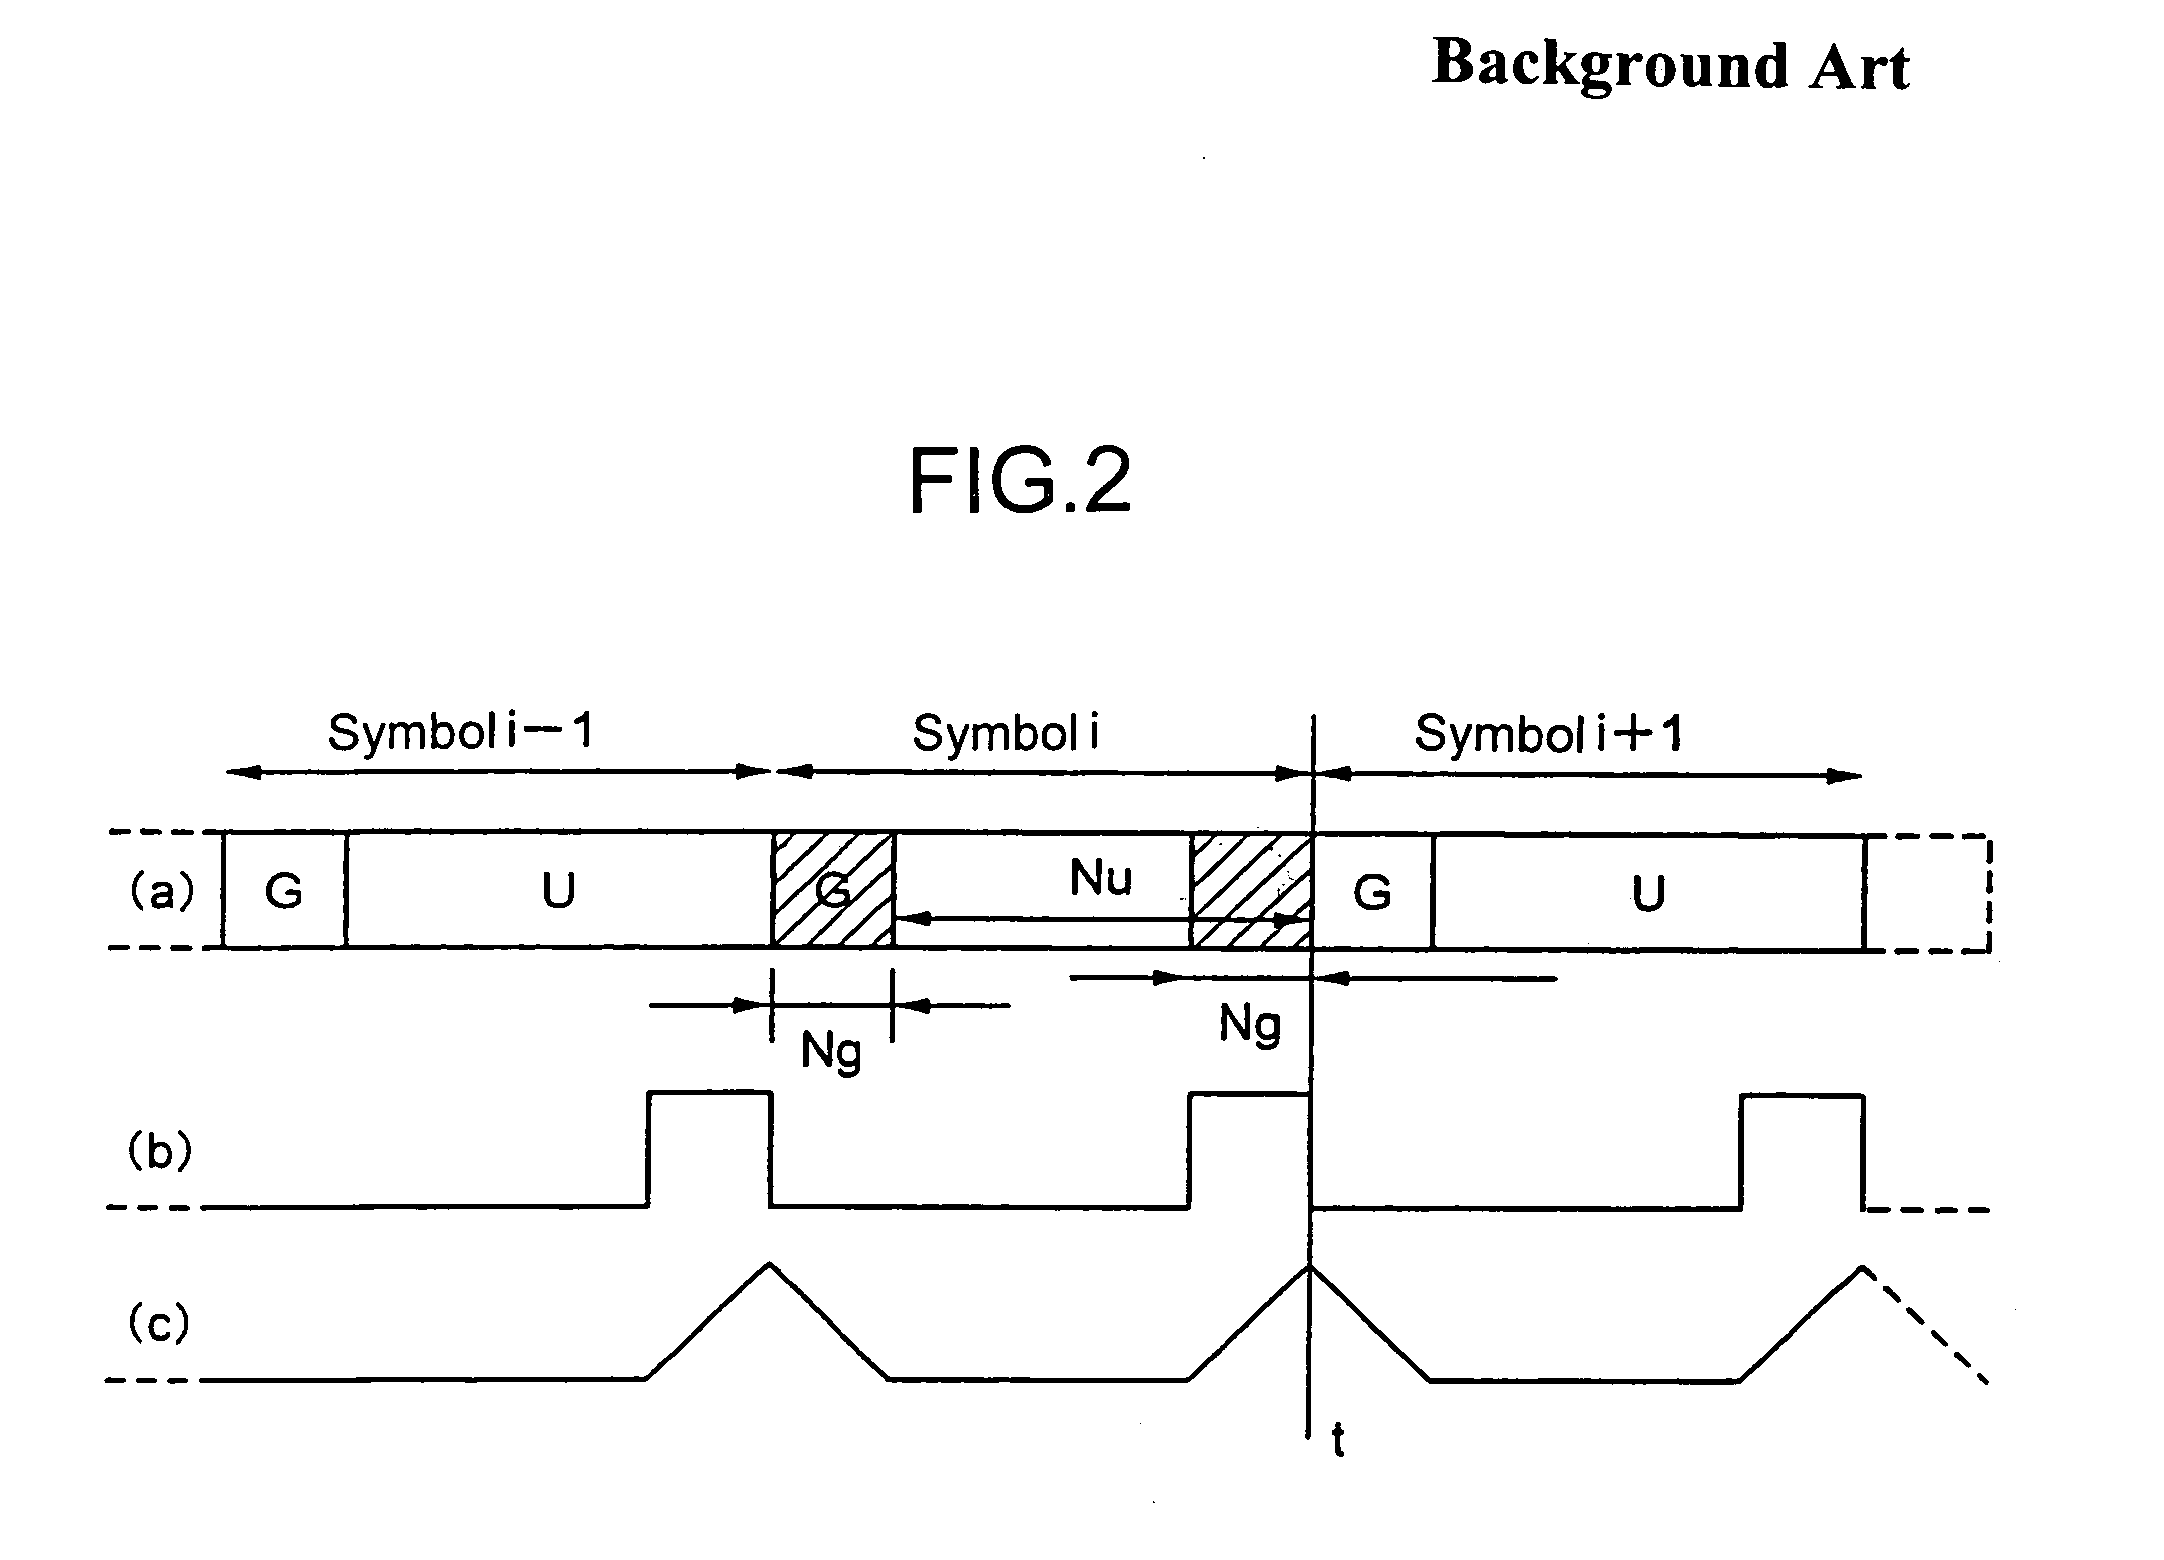 Synchronizing pulse generating method and method of receiving OFDM signal